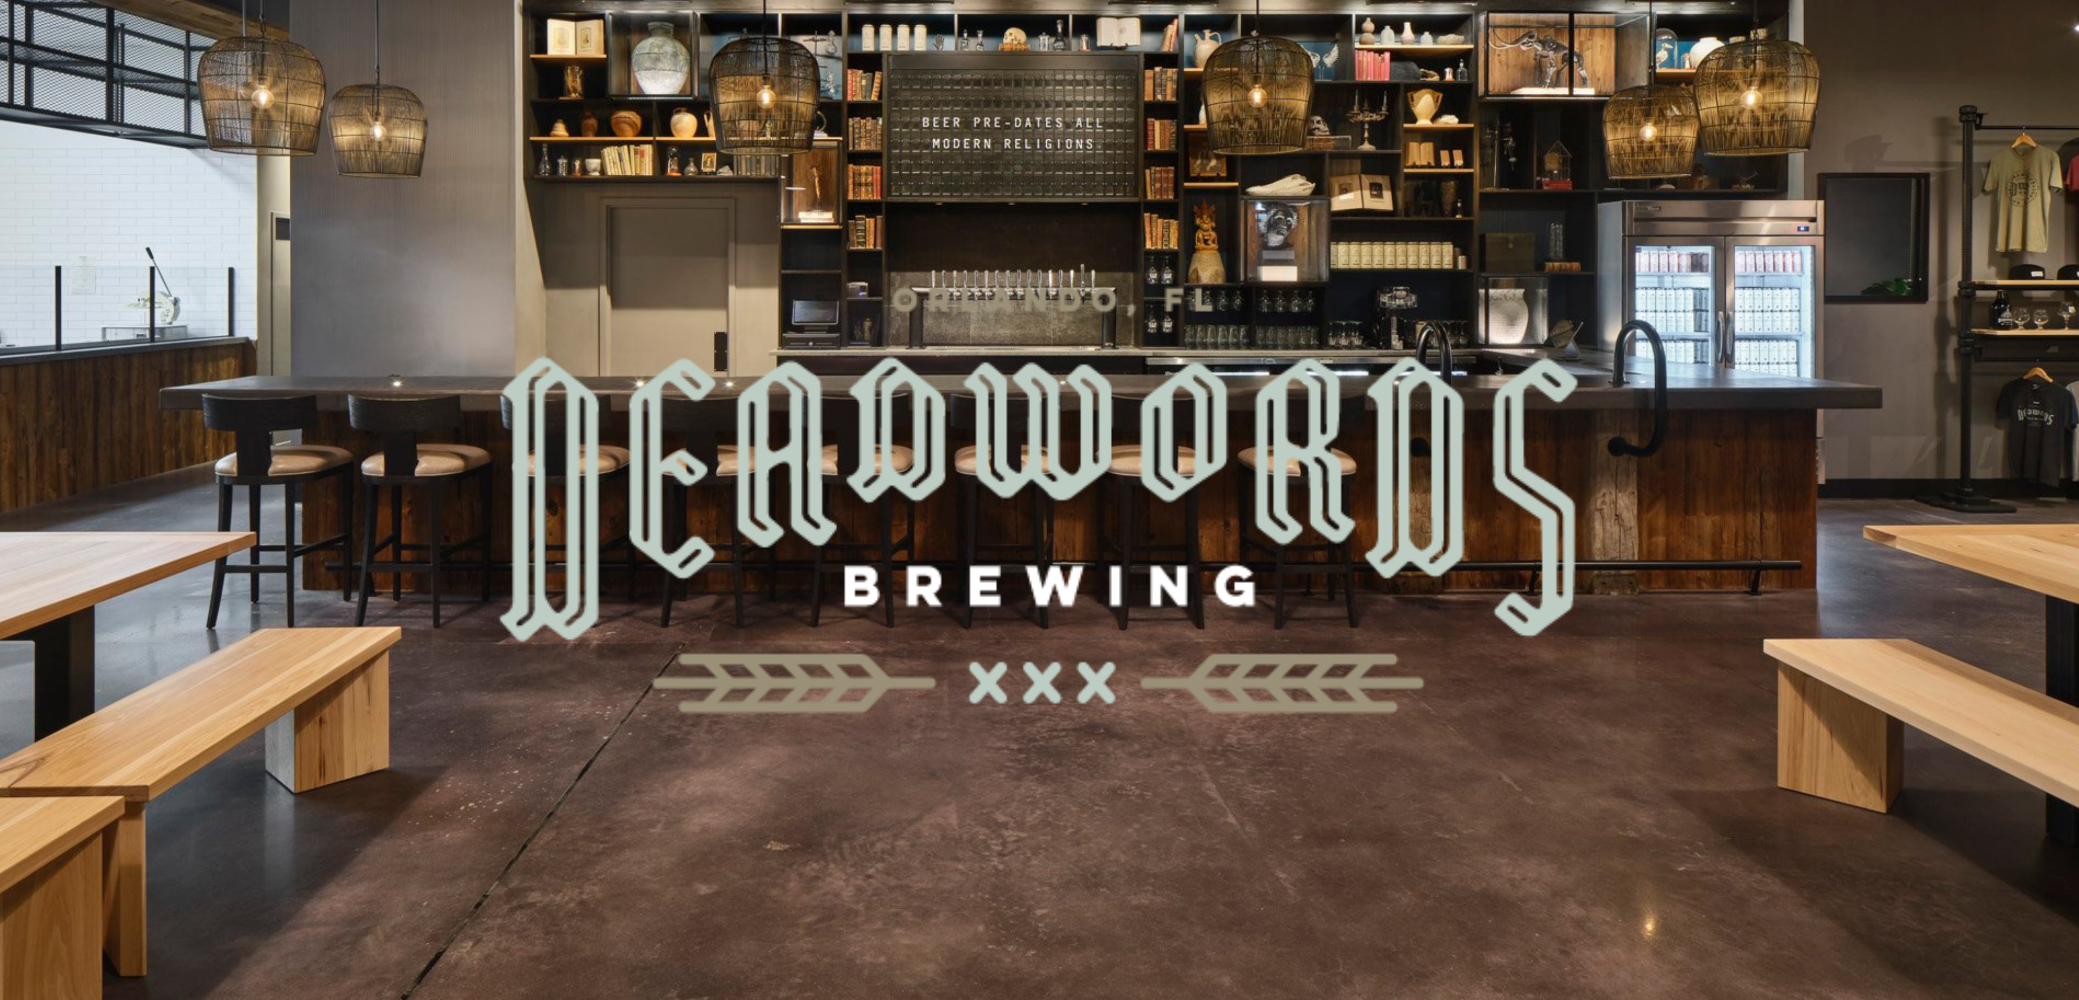 Deadwords Brewing Co: Avaiable Turnkey Prior to Auction: PKW 15 BBL Microbrewery w/ PKW 2 BBL Pilot System, Fermenters, Brites, Chiller, Boiler